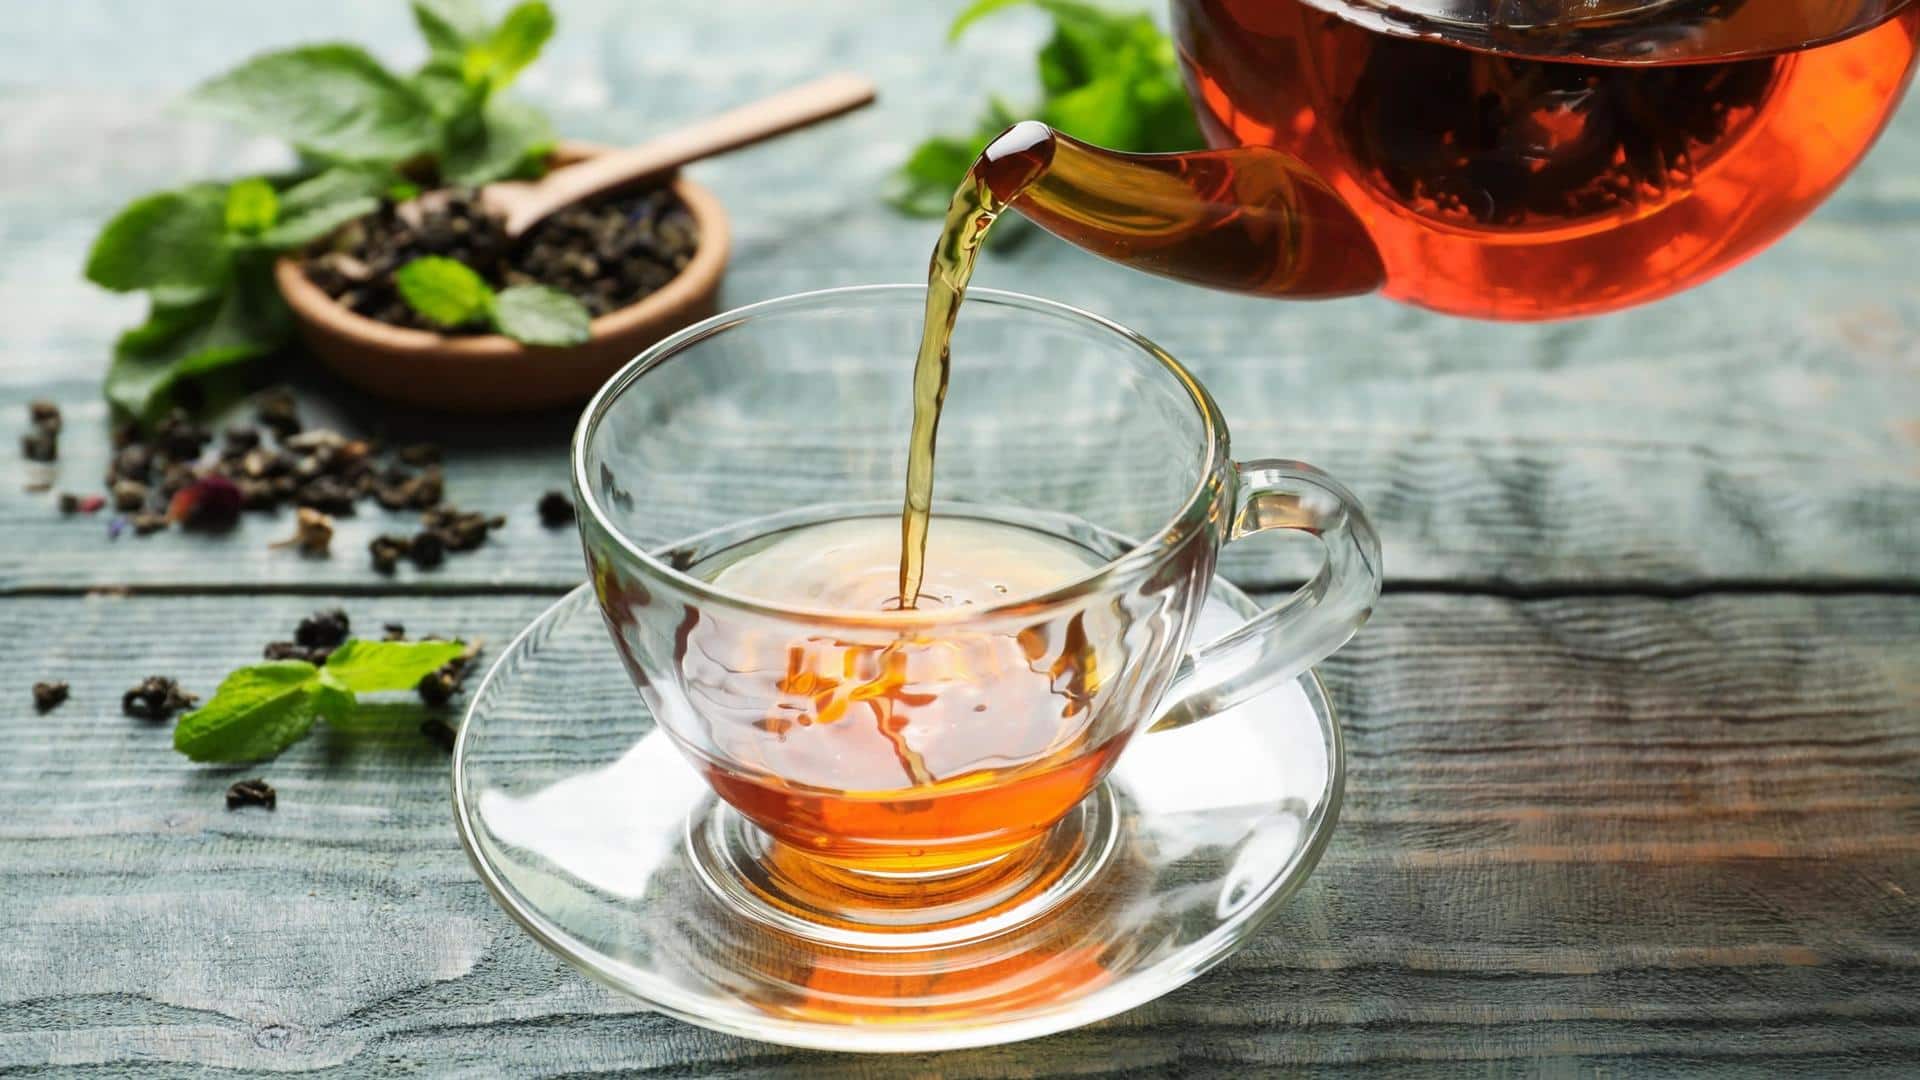 Tea myths you have been believing for far too long